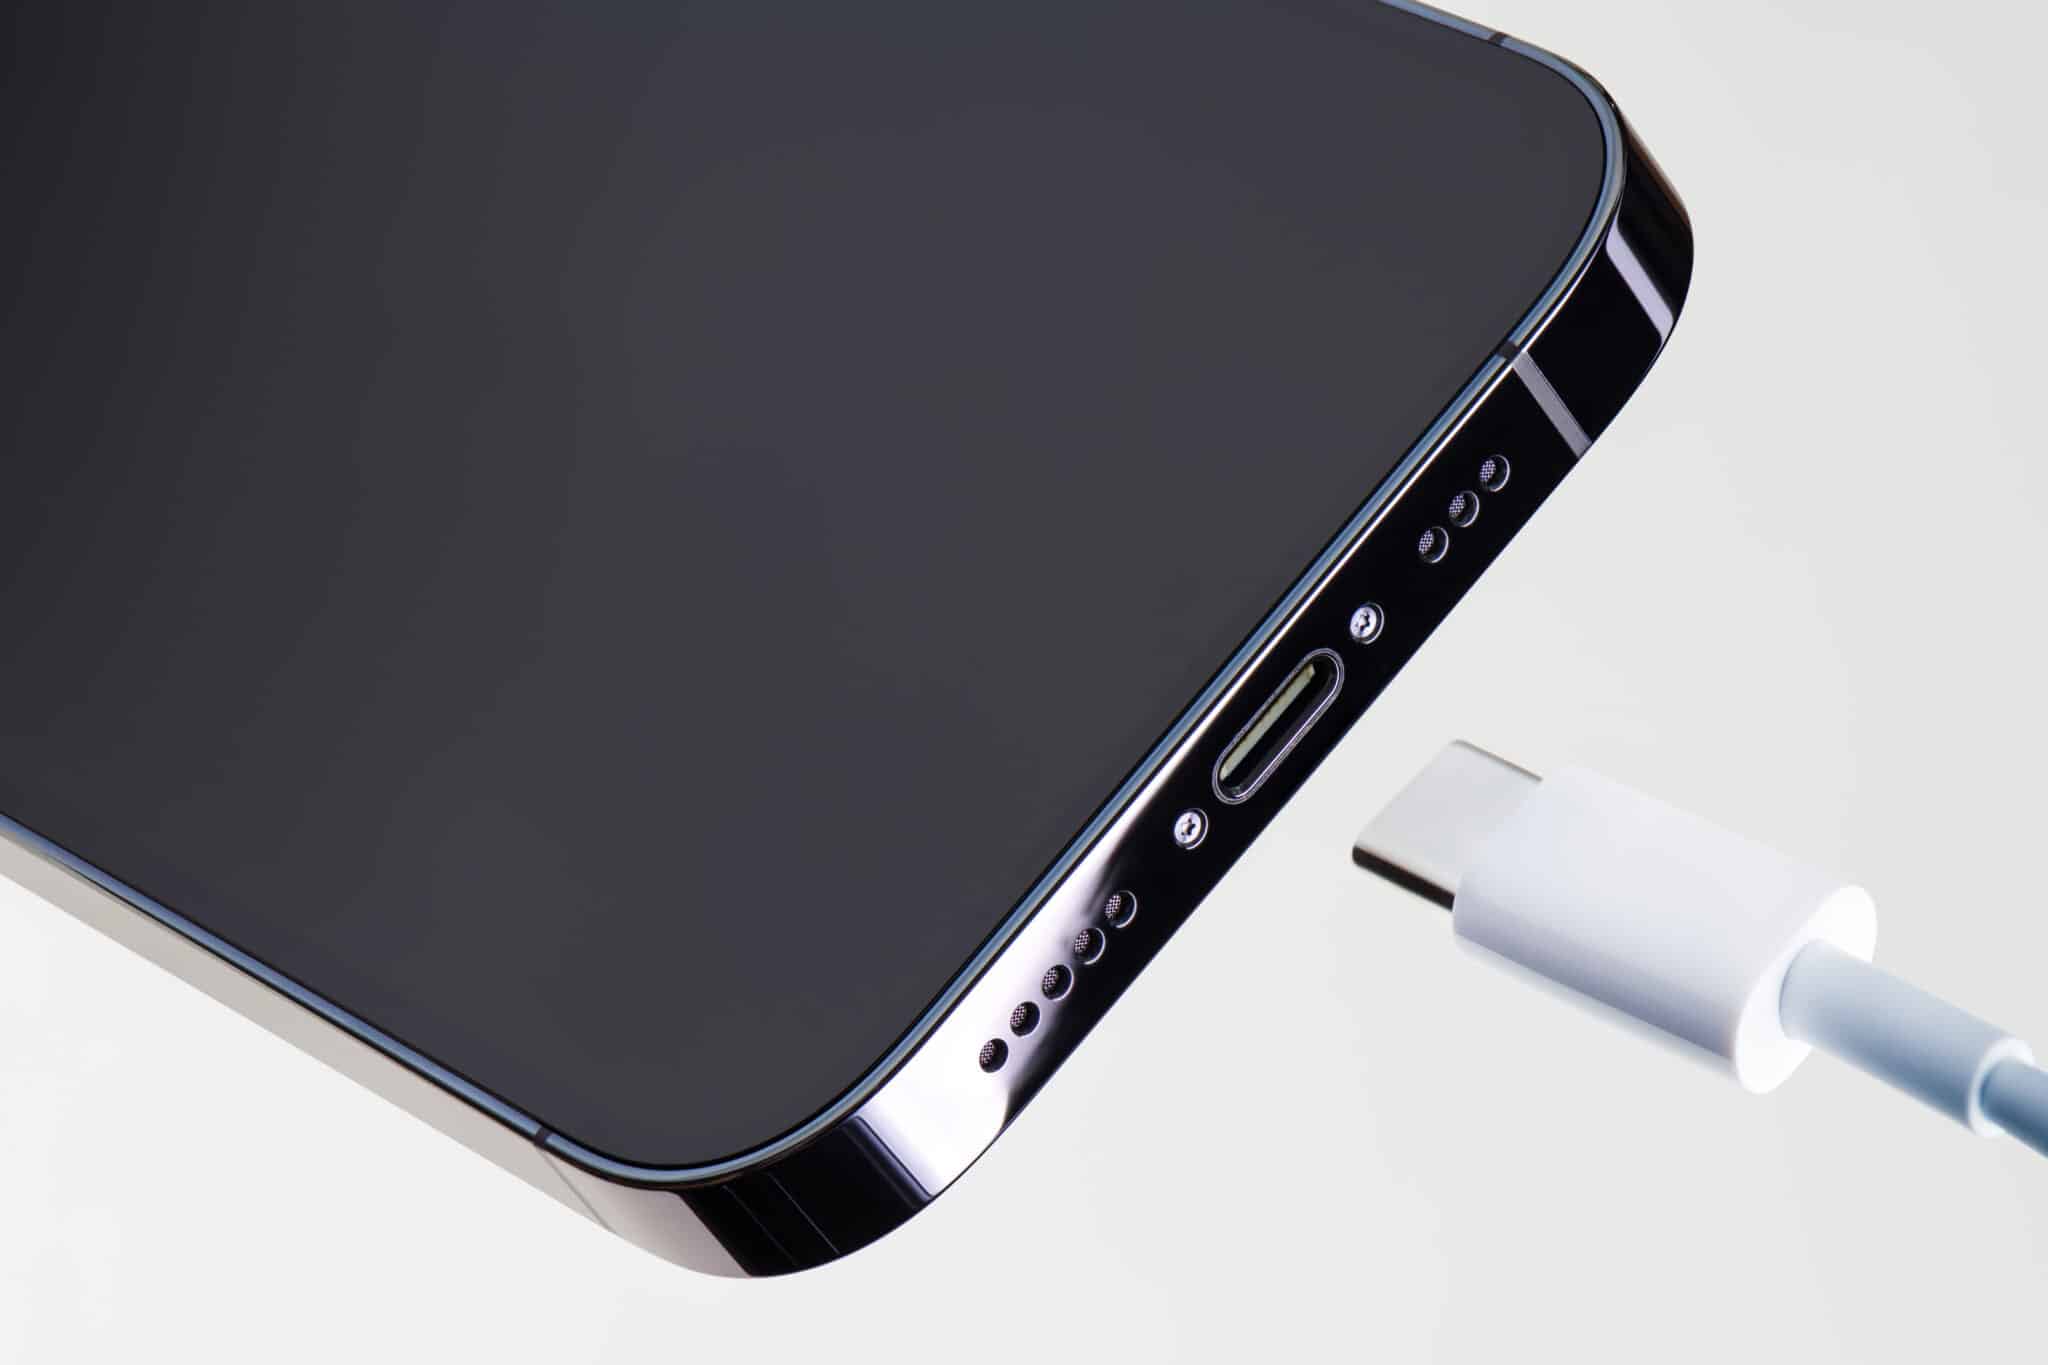 USB-C port and cord on smartphone